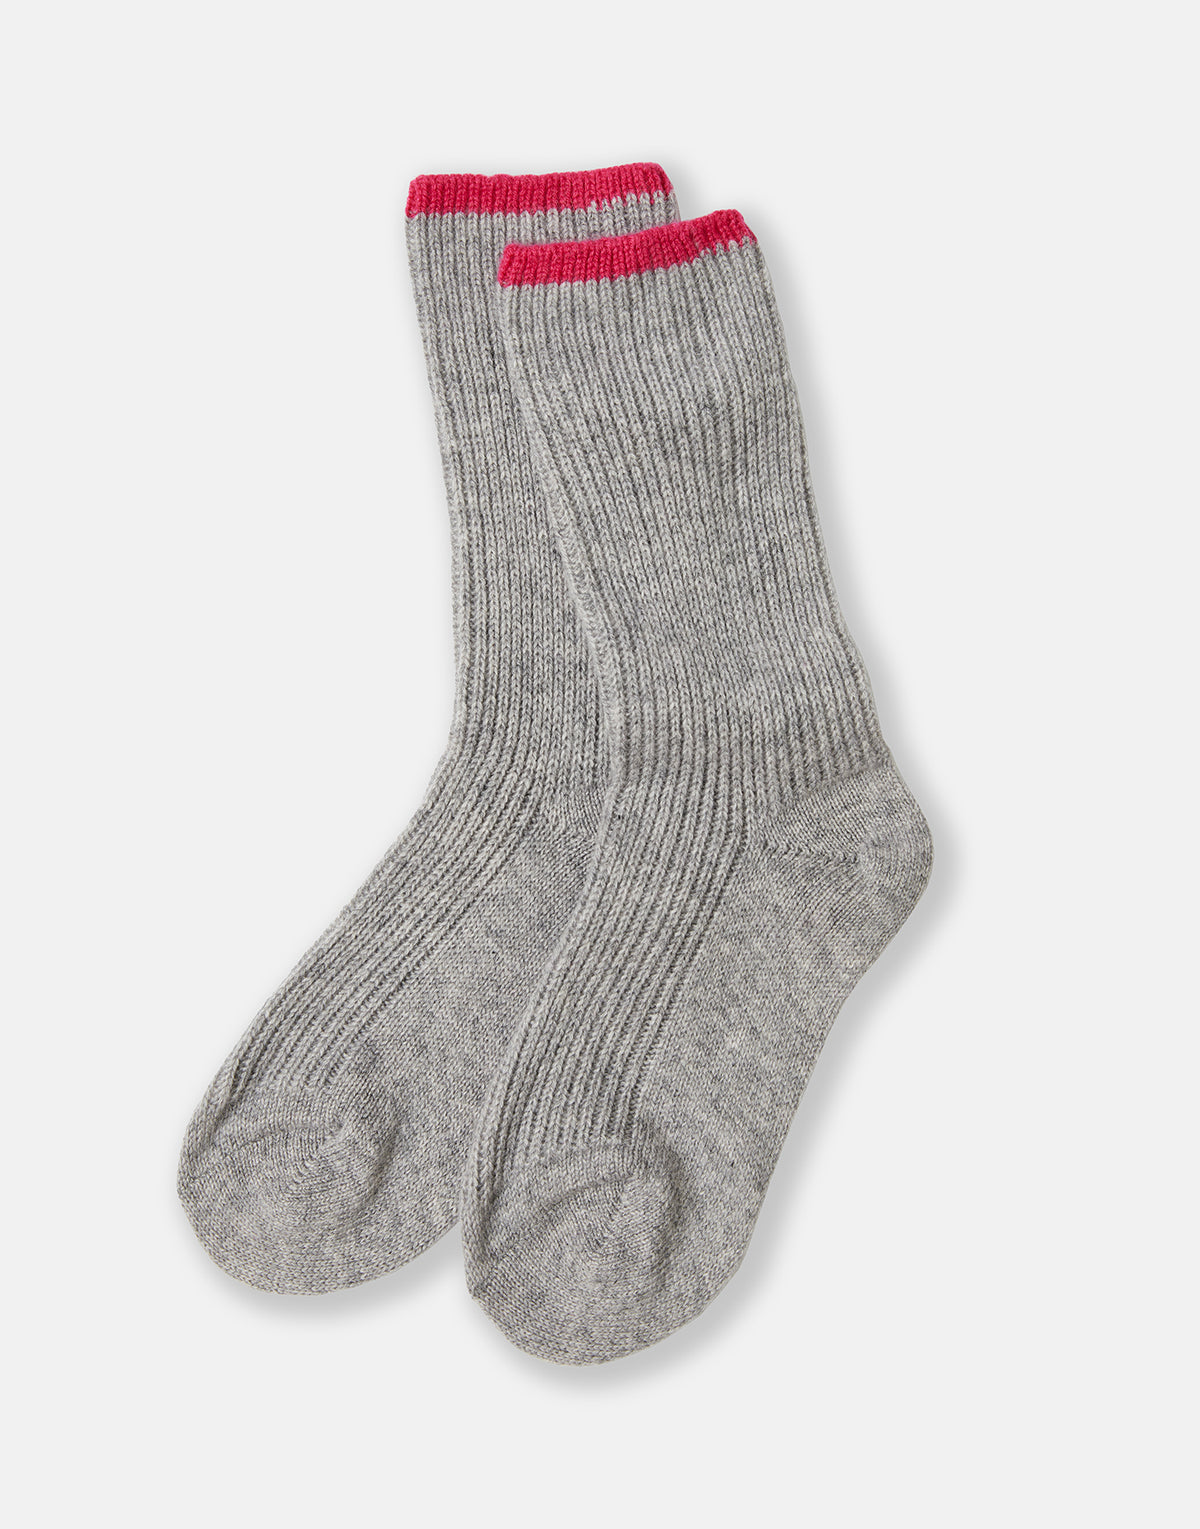 letterbox gift cashmere bed socks - grey